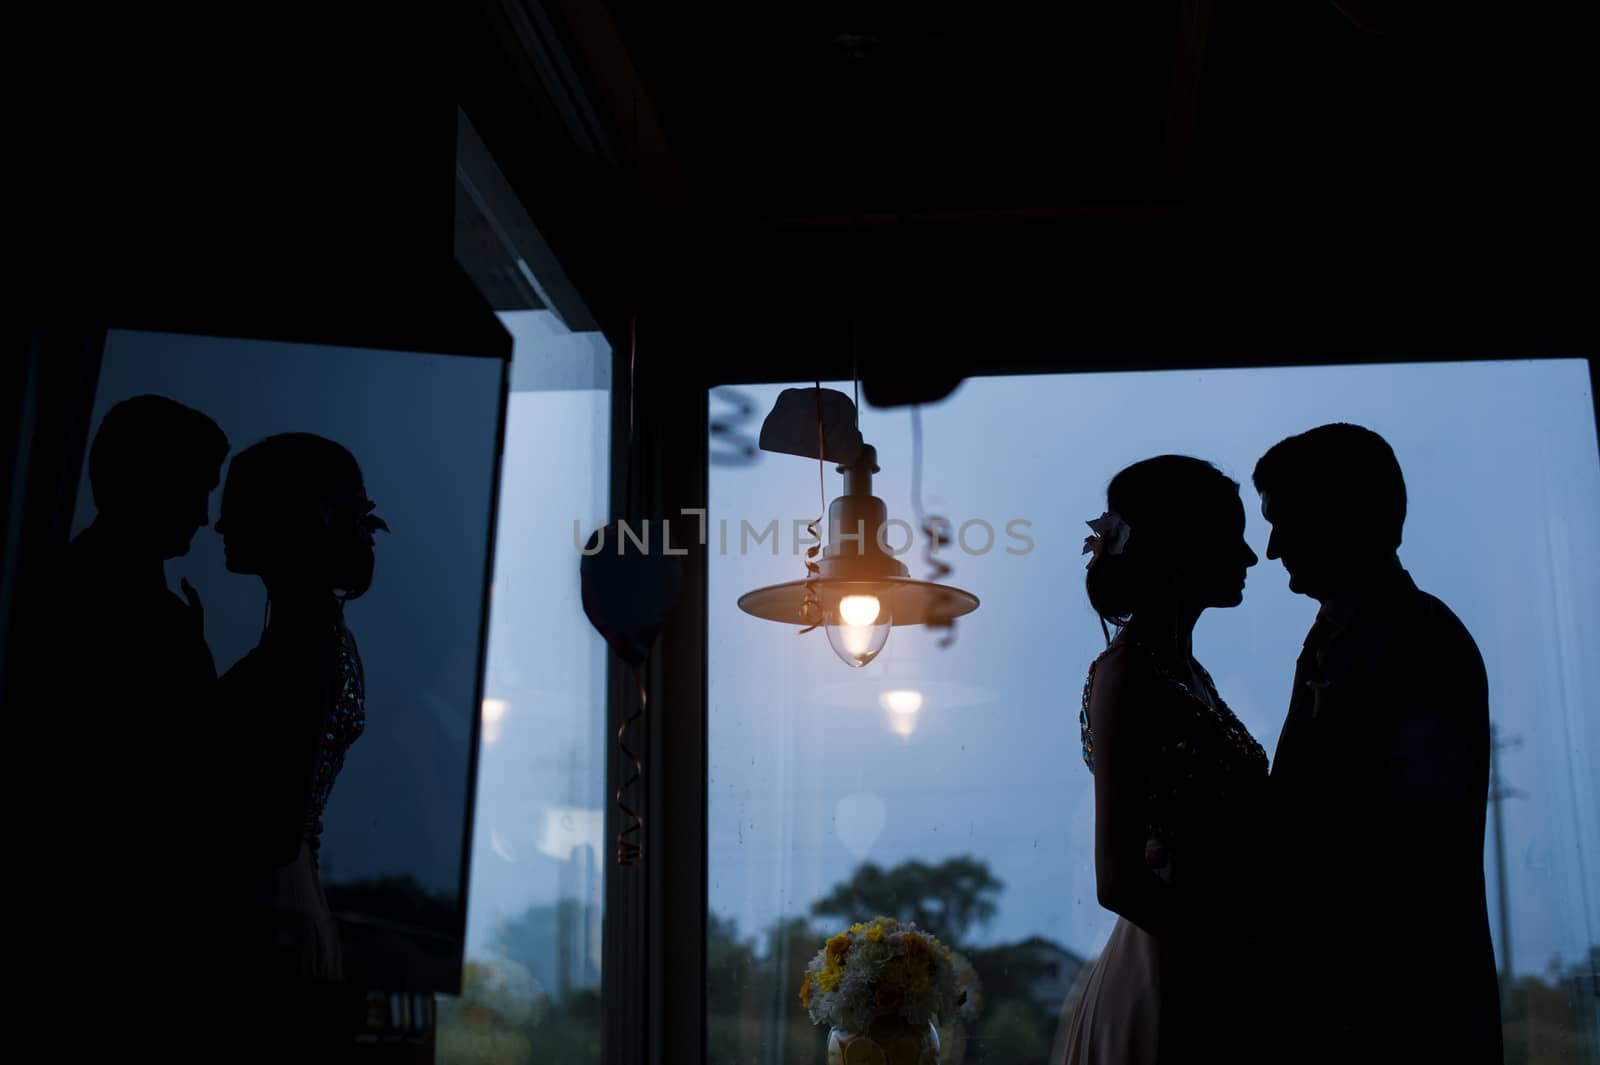 silhouettes of the bride and groom on the background of the window